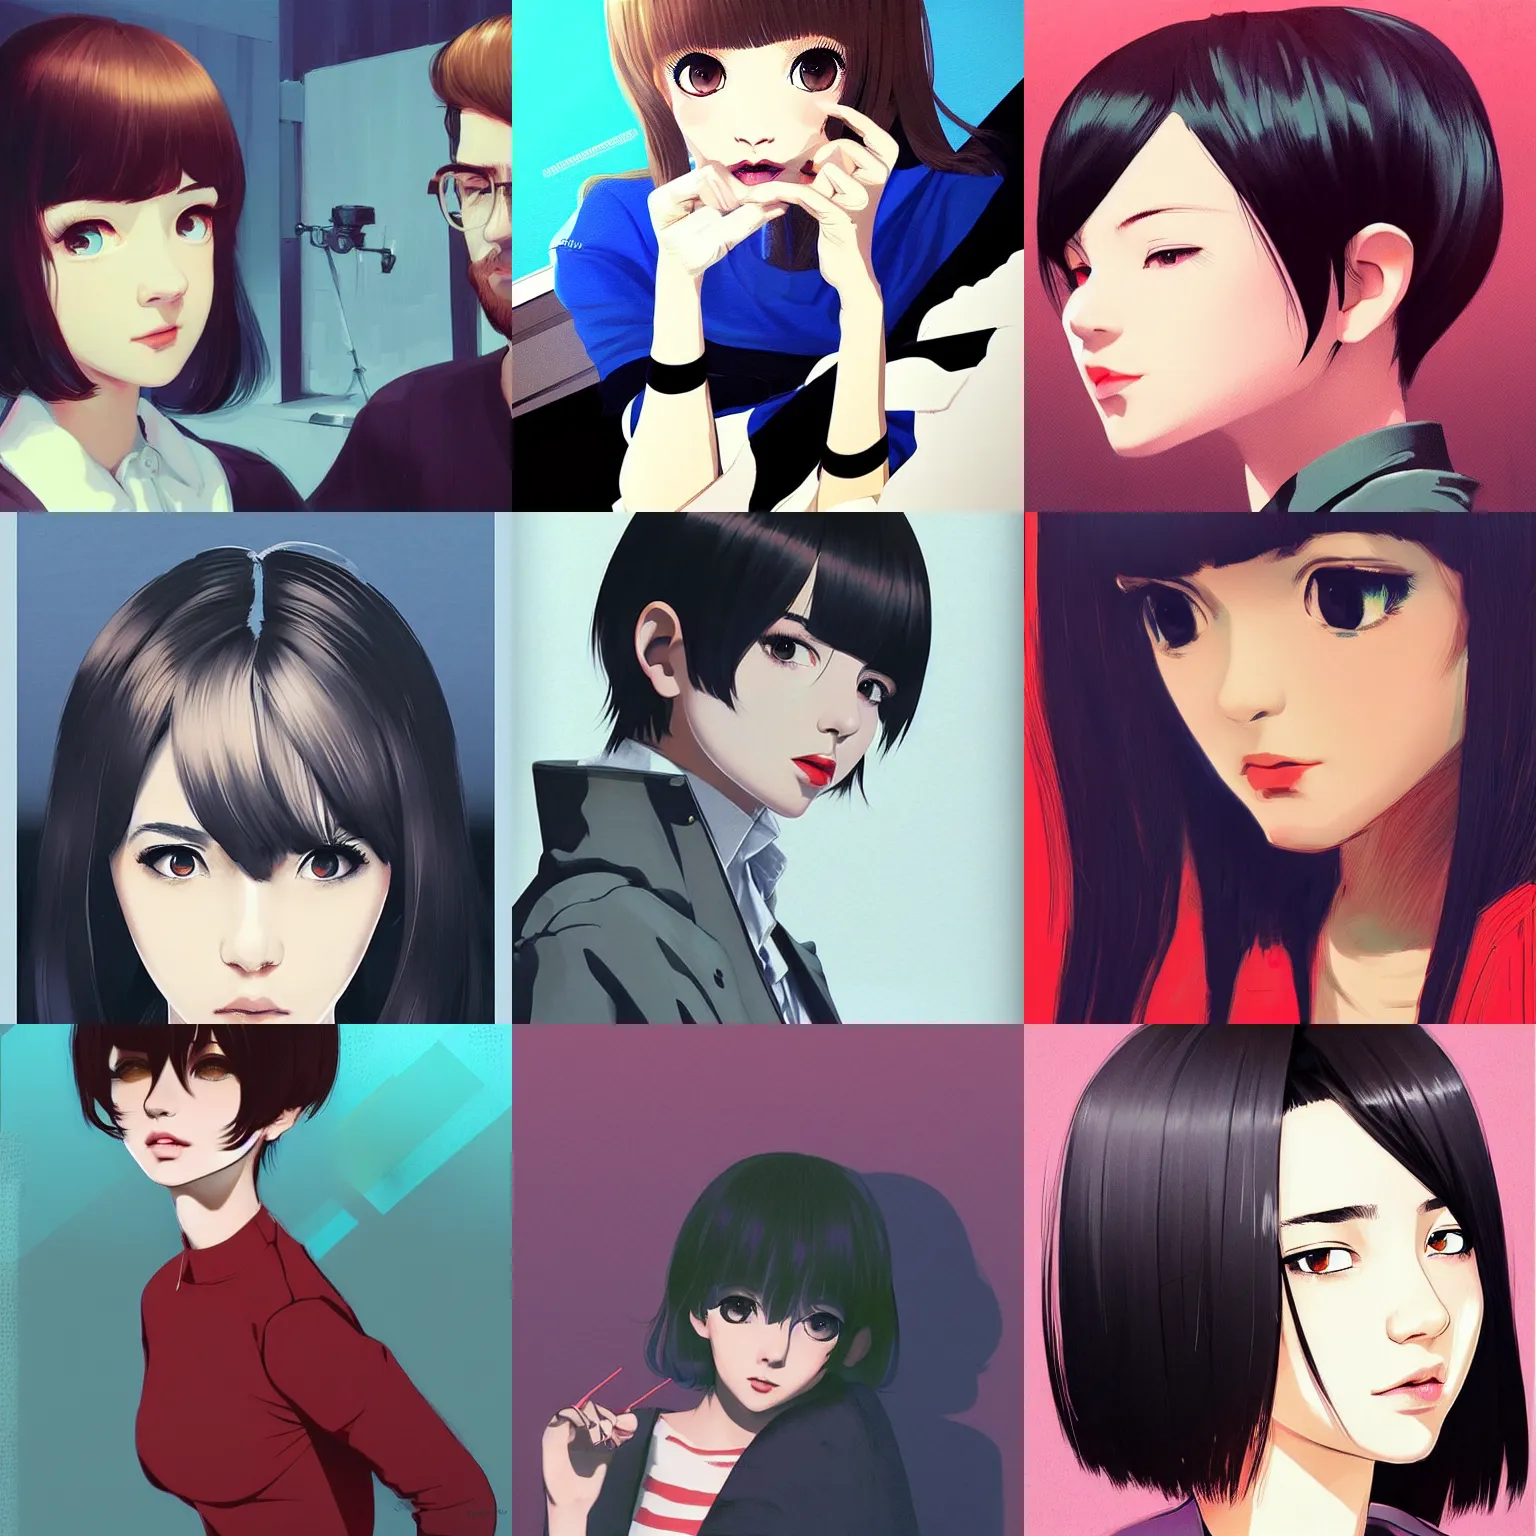 Prompt: portrait by ilya kuvshinov illustration collection aaaa updated watched premiere edition commission ✨ whilst watching fabulous artwork exactly your latest completed artwork discusses upon featured announces recommend achievement